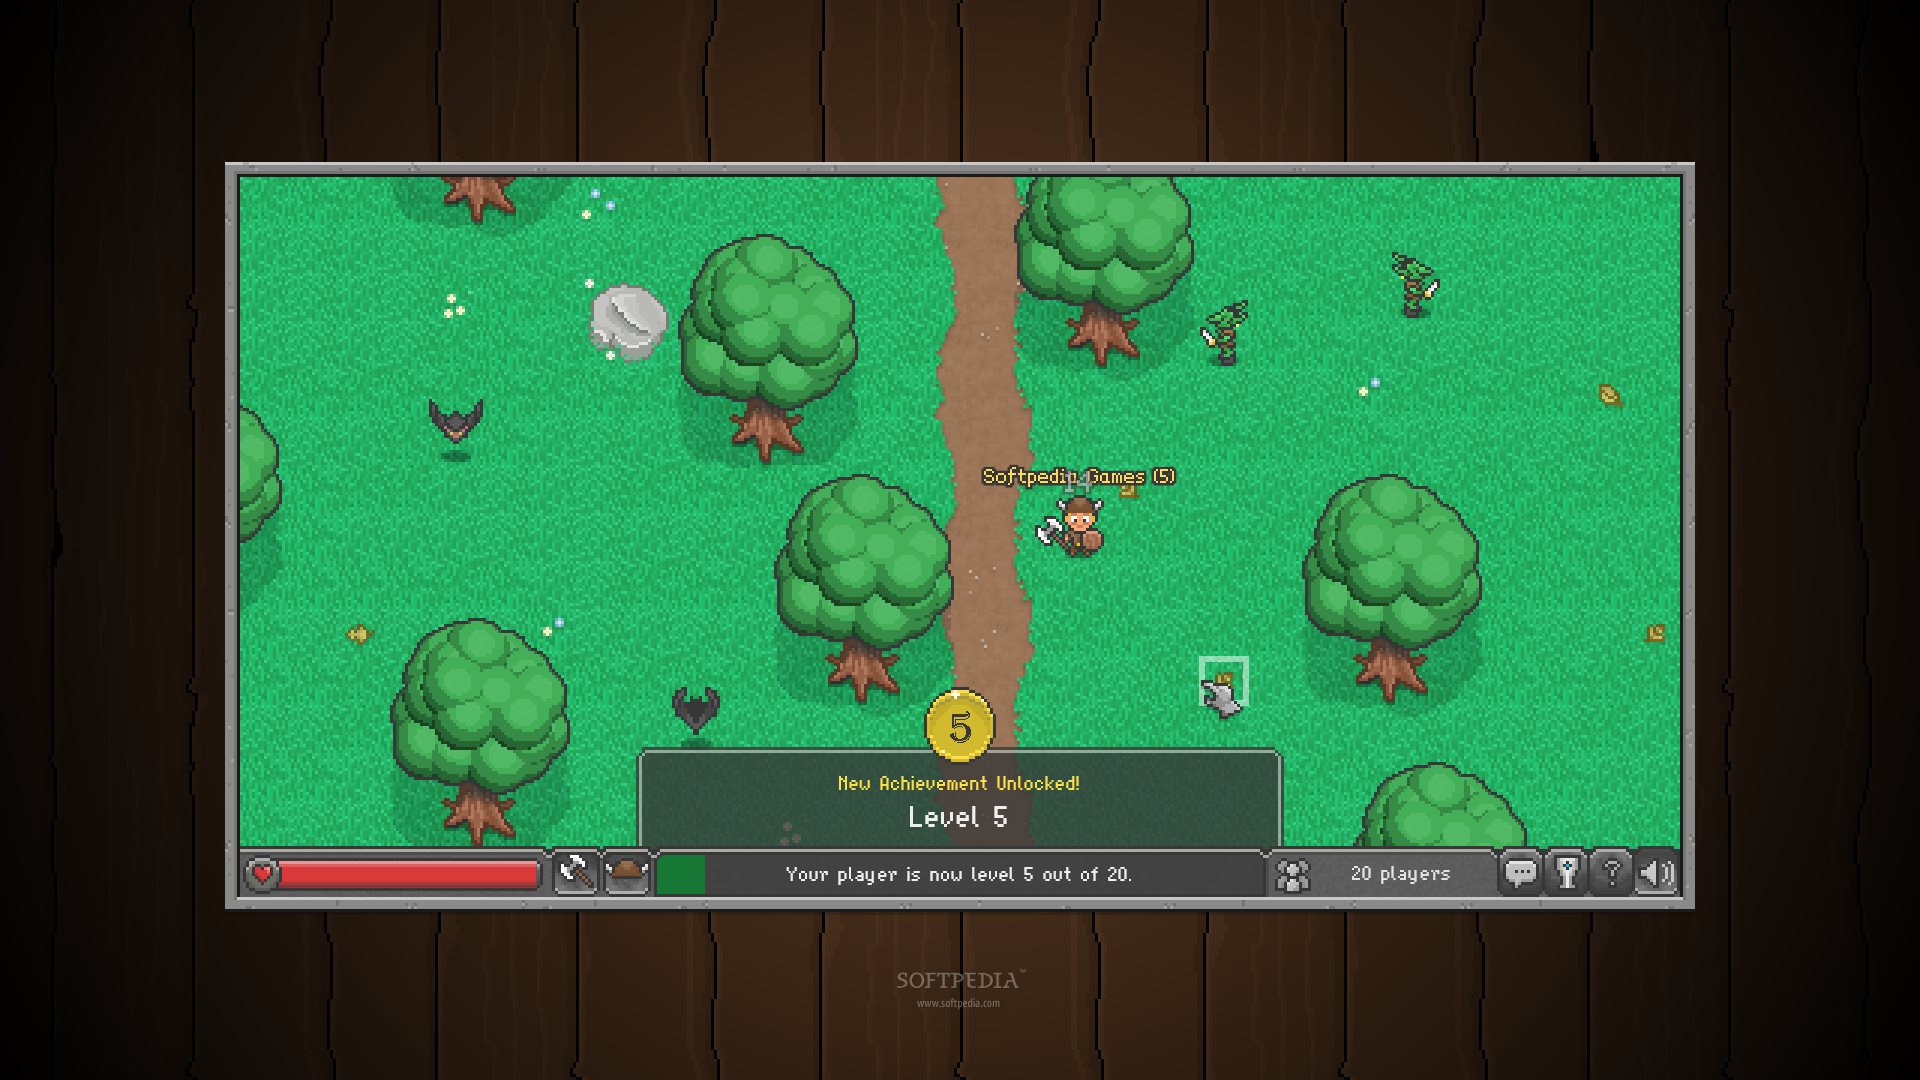 Browser quest, HTML5 RPG game : r/InternetIsBeautiful